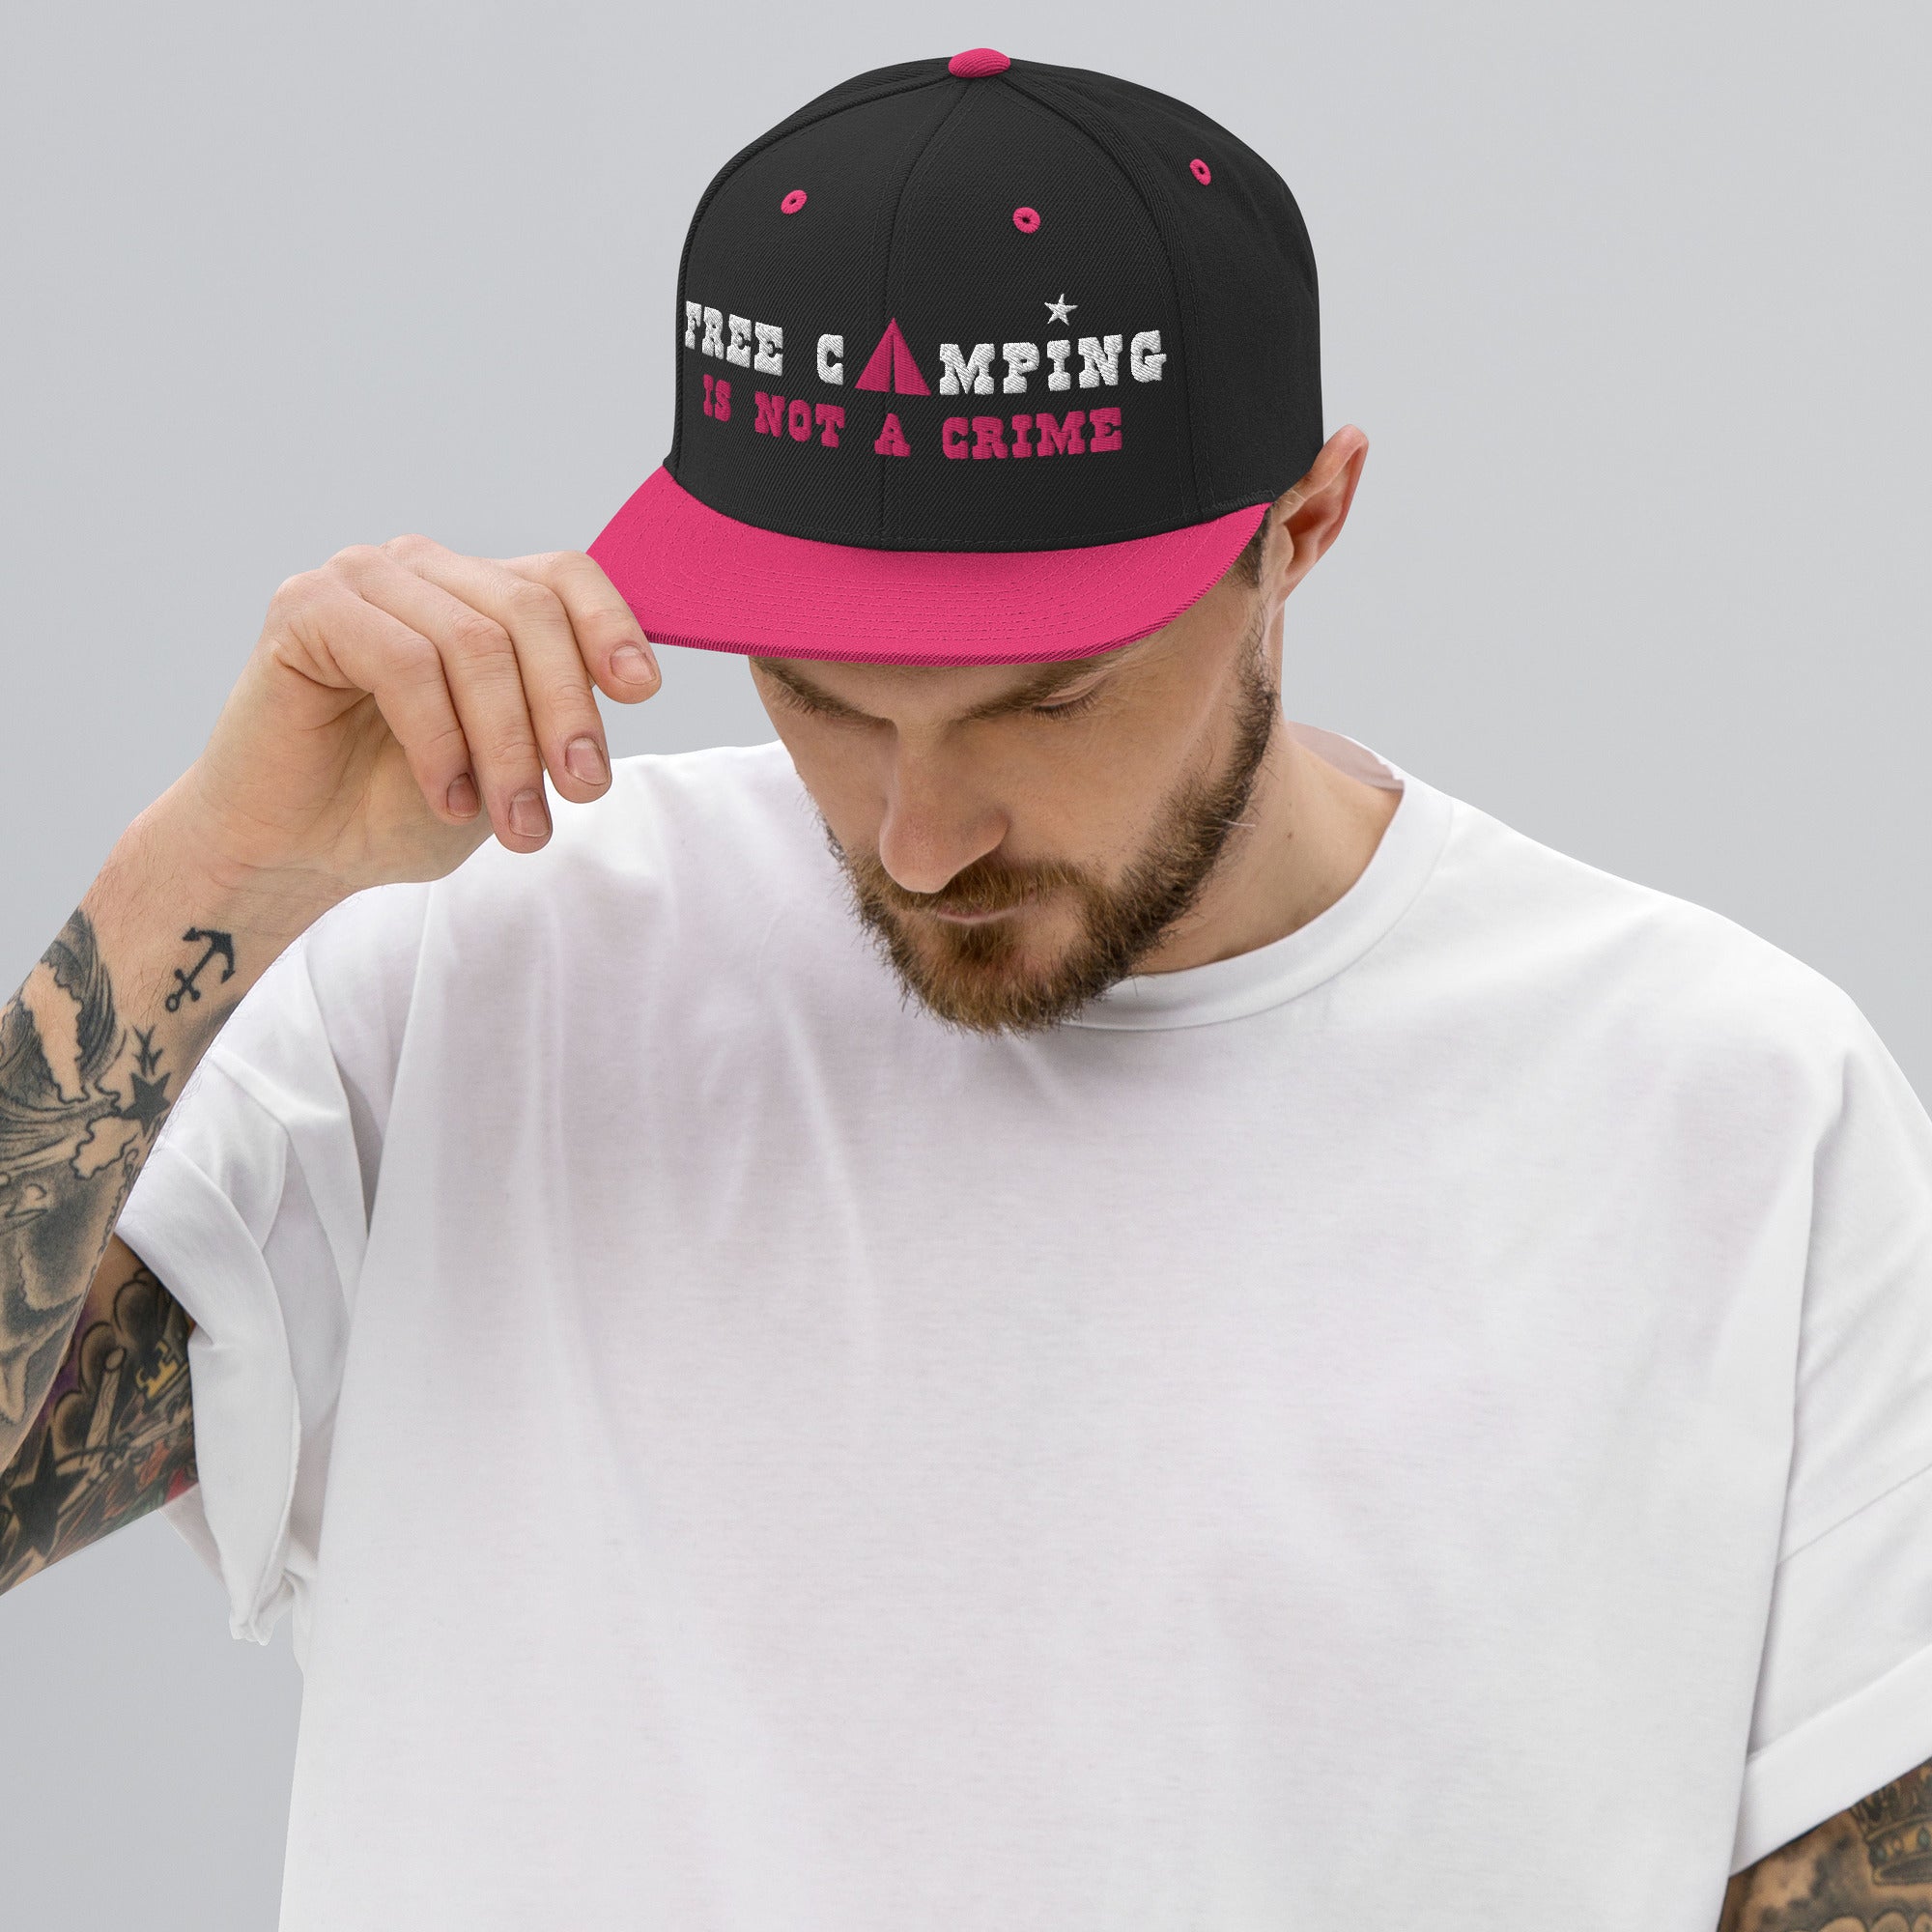 Two-Tone Snapback Wool Blend Cap Free camping is not a crime white/flamingo